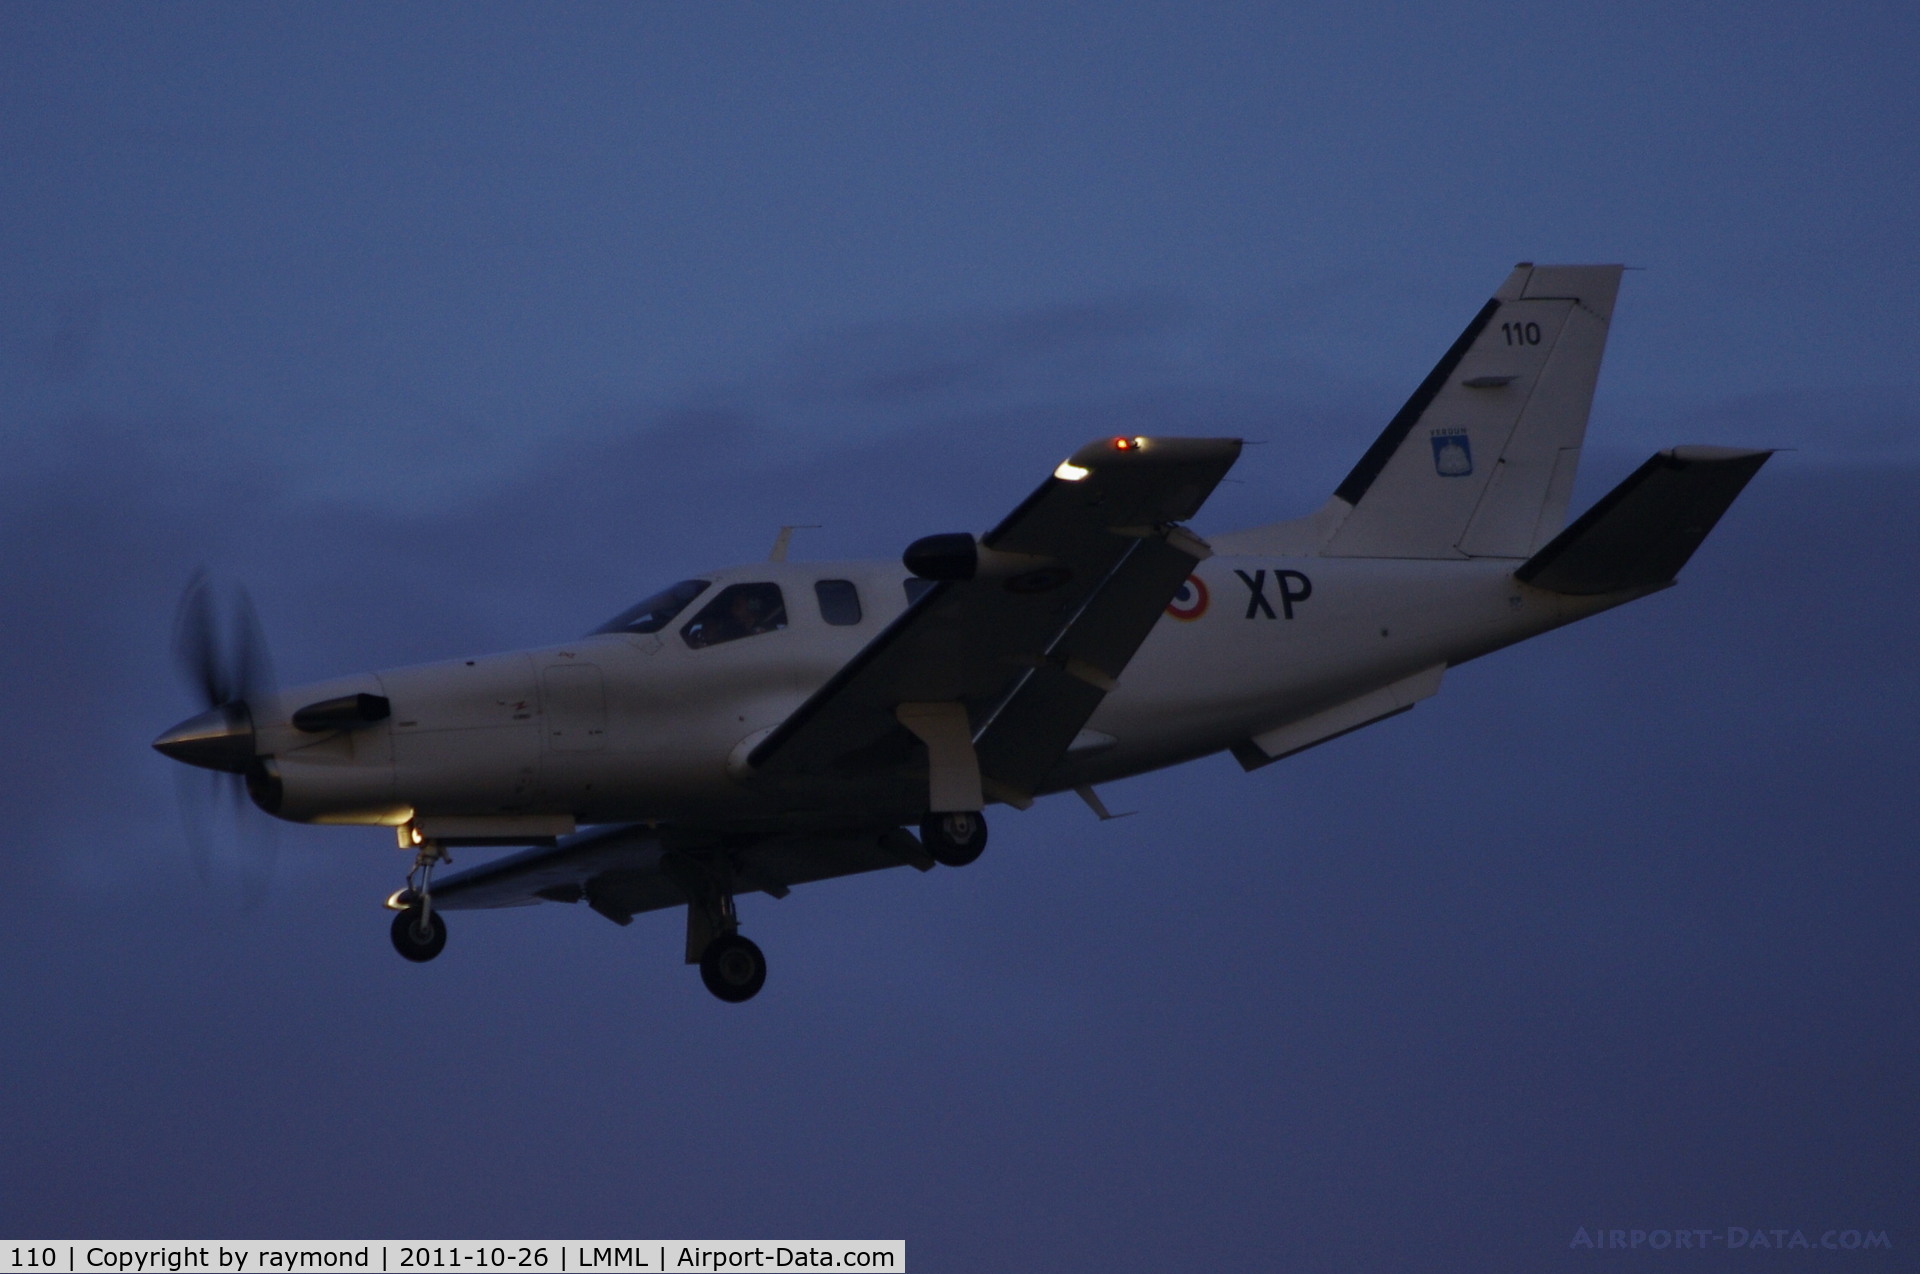 110, Socata TBM-700A C/N 110, TBM-700 110/XP French Air Force about to land at Malta.